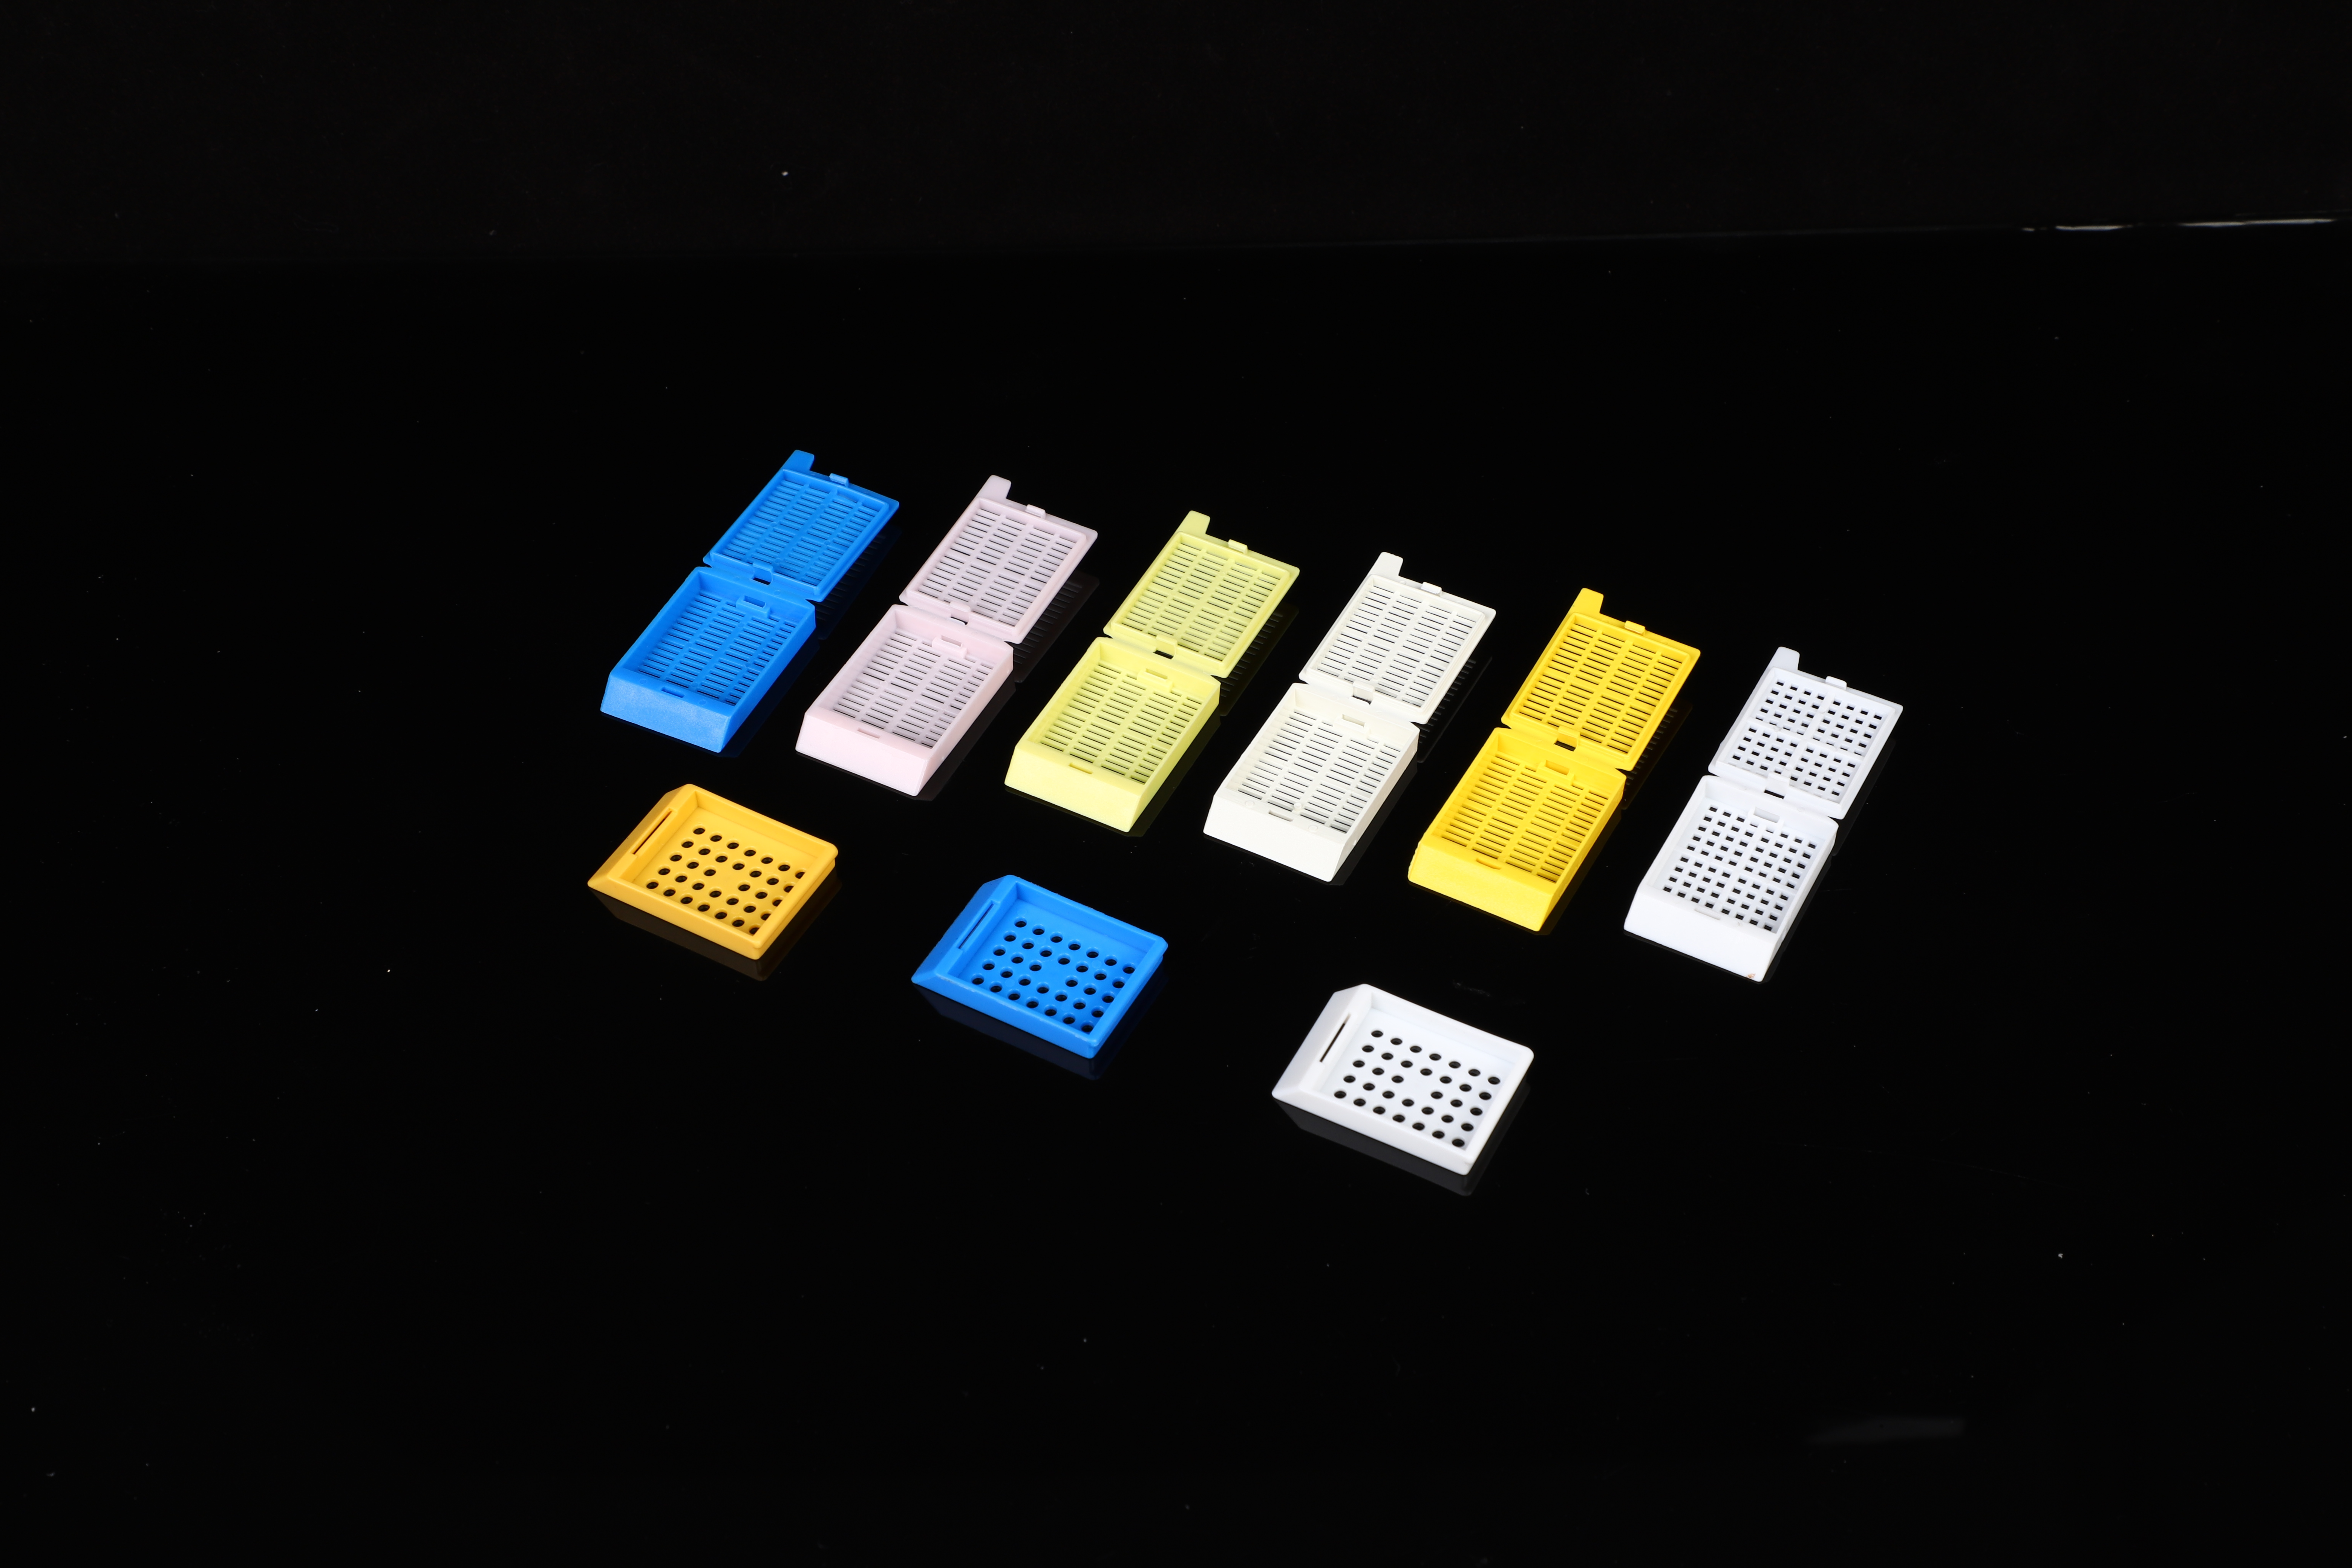 Factory Direct: High-Quality POM Disposable Embedding Boxes in a Variety of Types – Order Now!